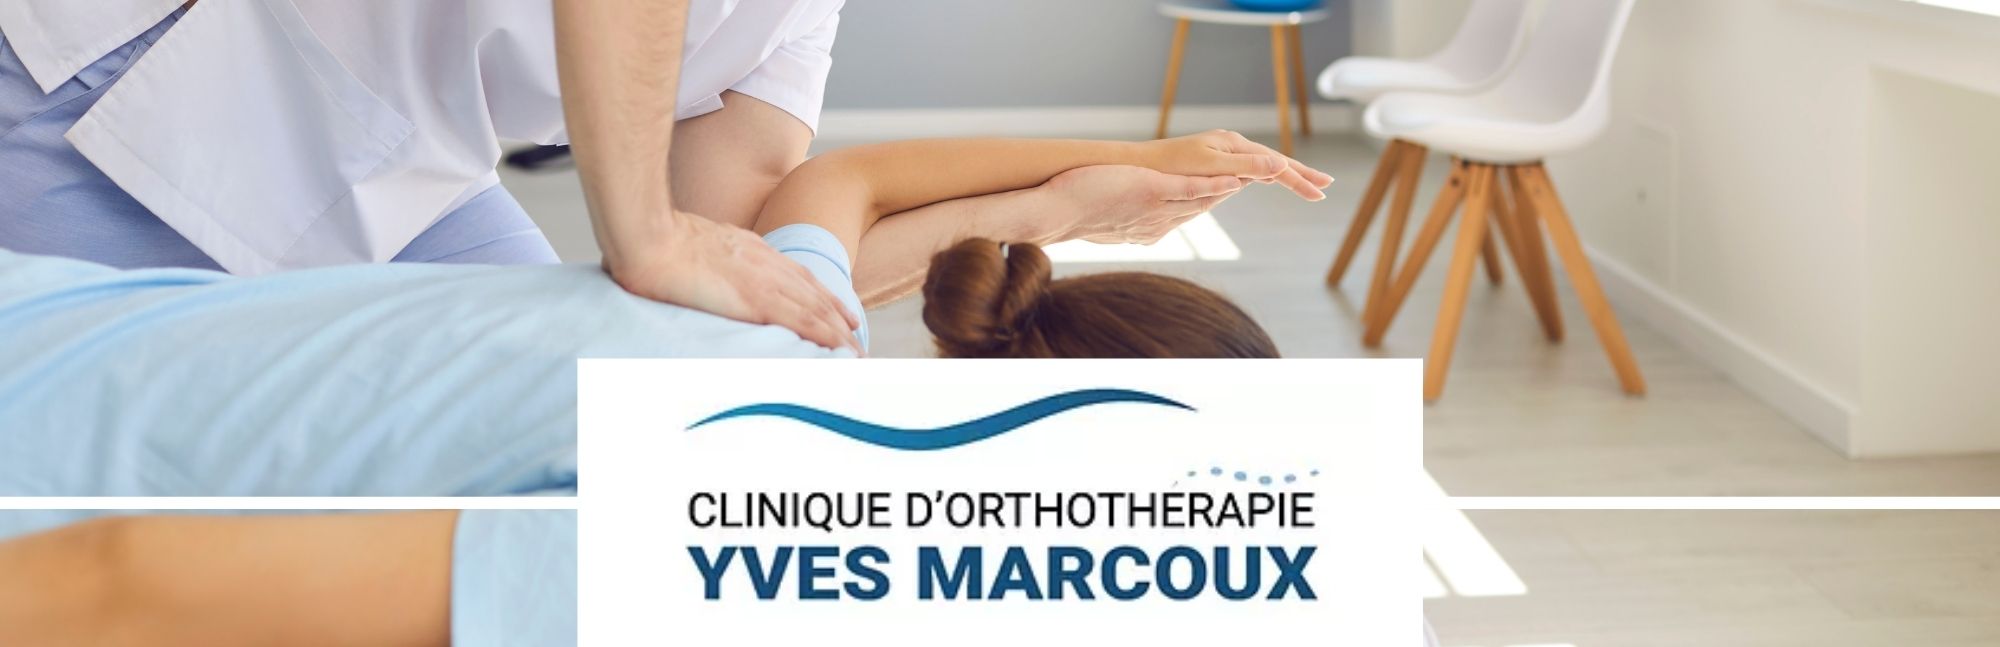 Clinique Orthotherapie Yves Marcoux 6